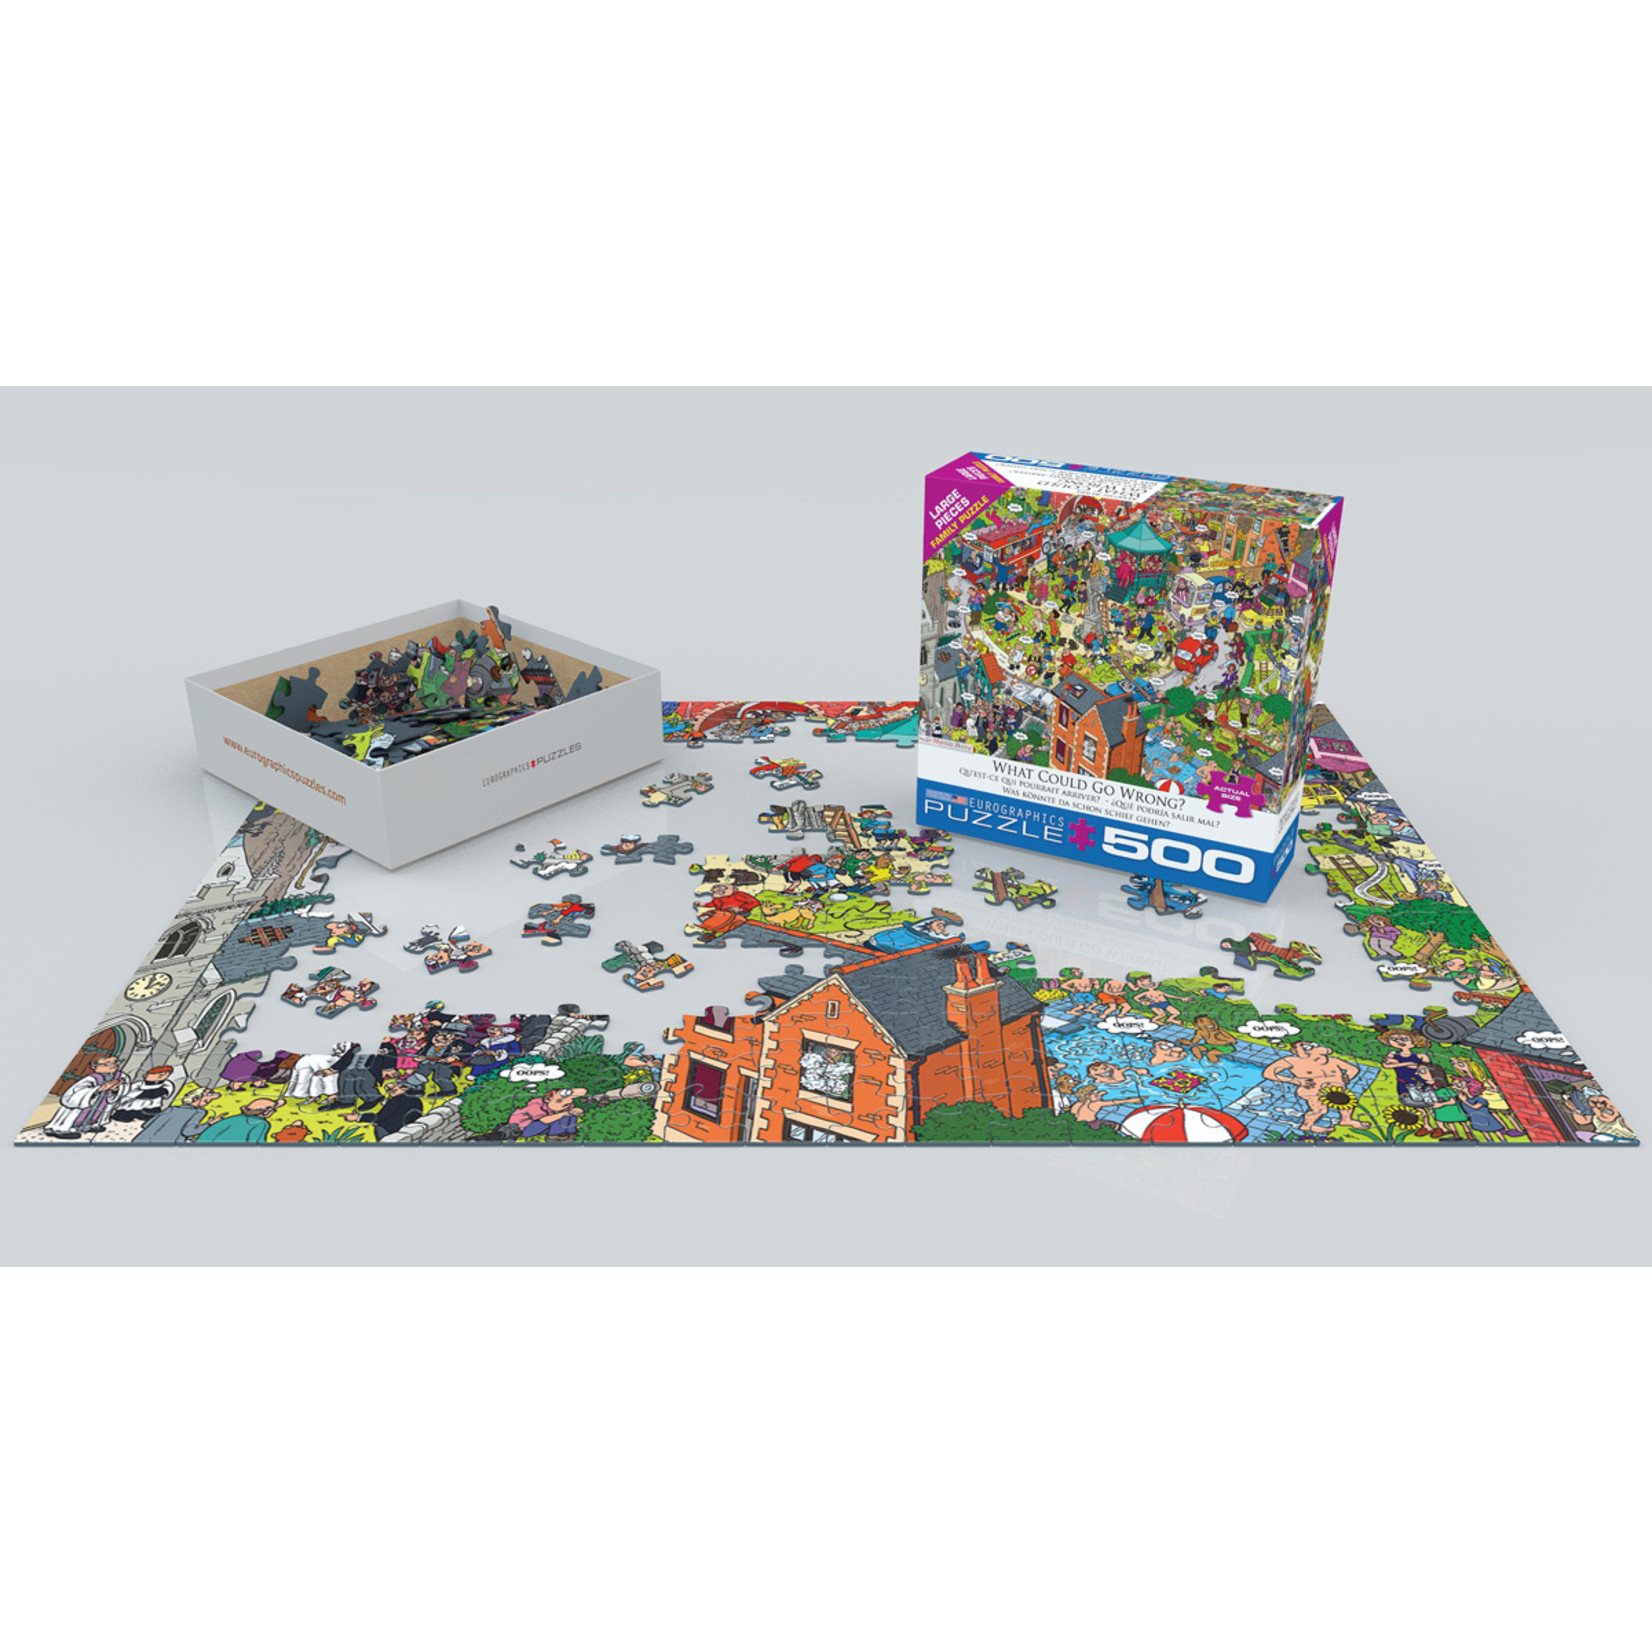 EuroGraphics Puzzles What Could go Wrong? 500pc